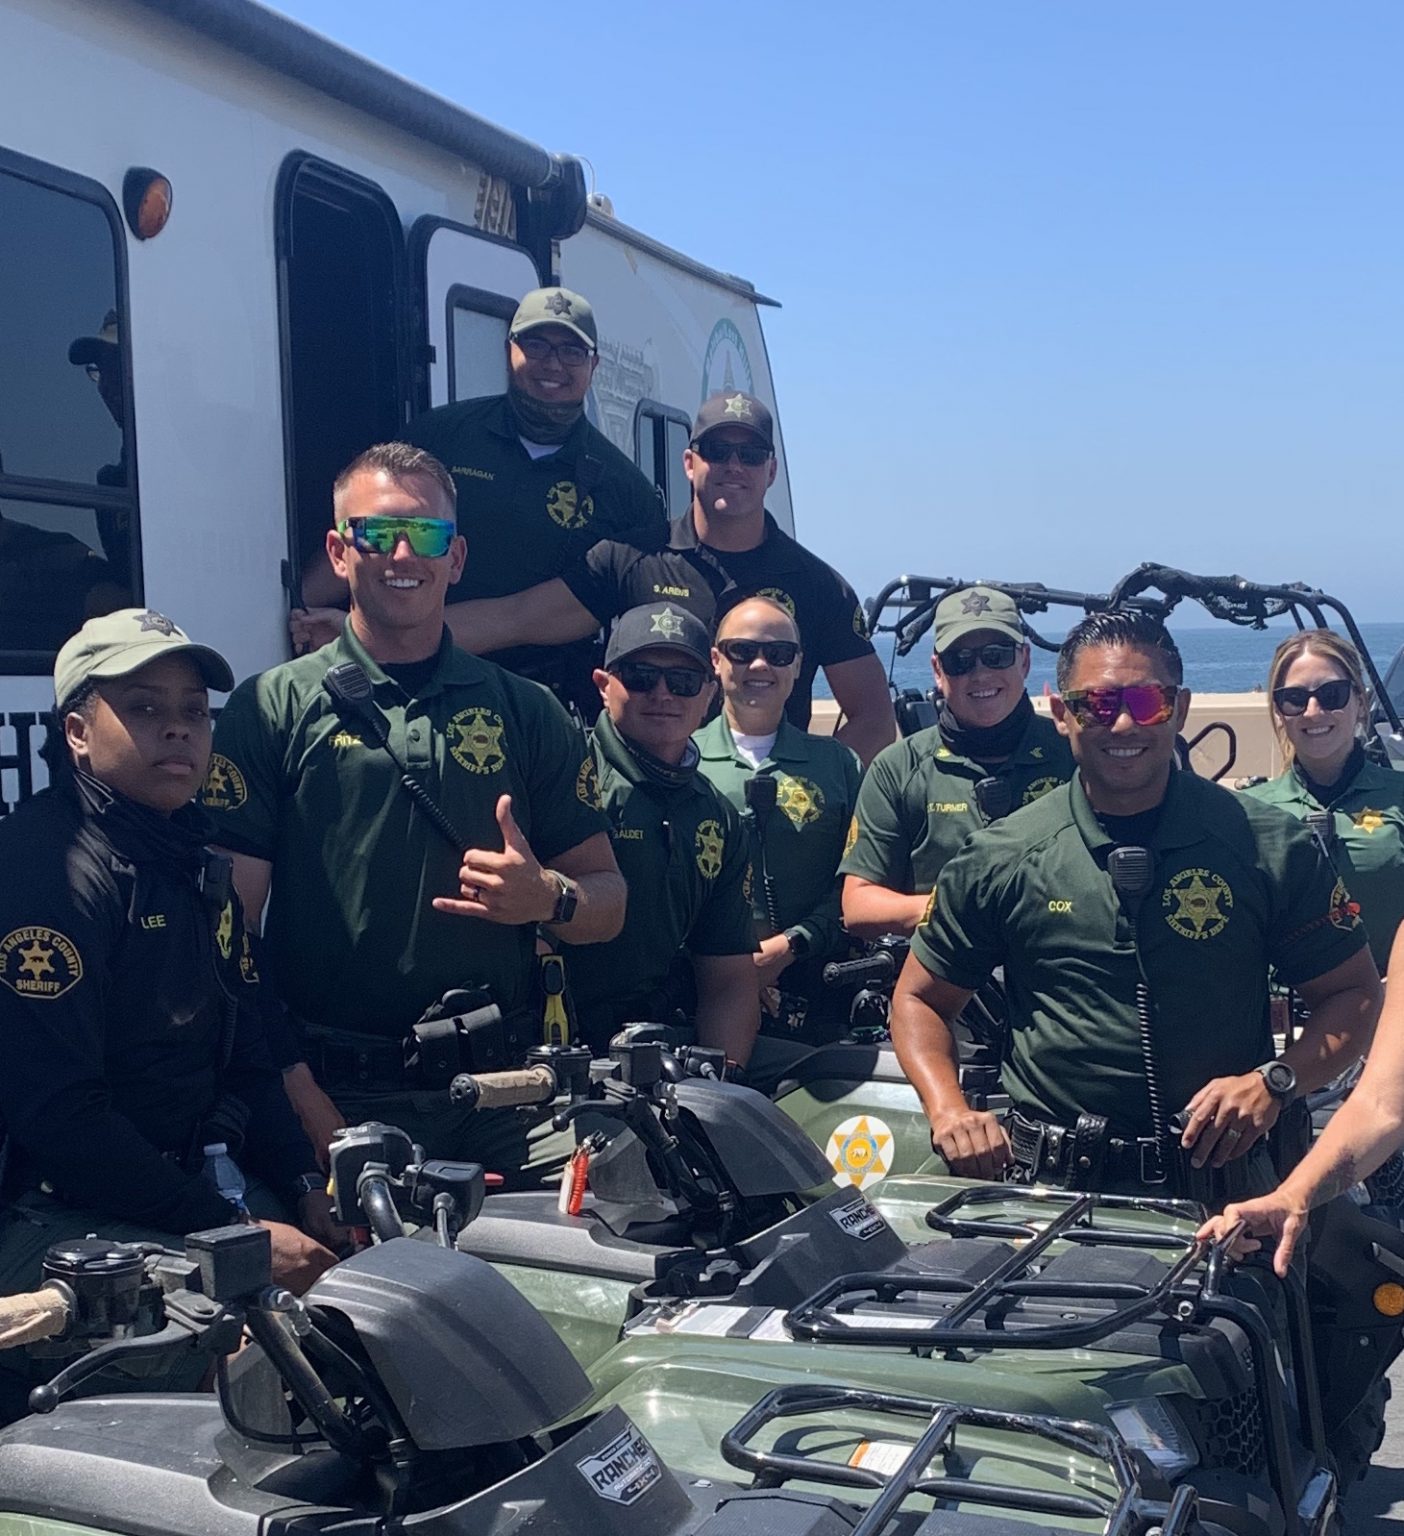 Lost Hills Sheriff’s Station Beach Team to Start Patrols Early in